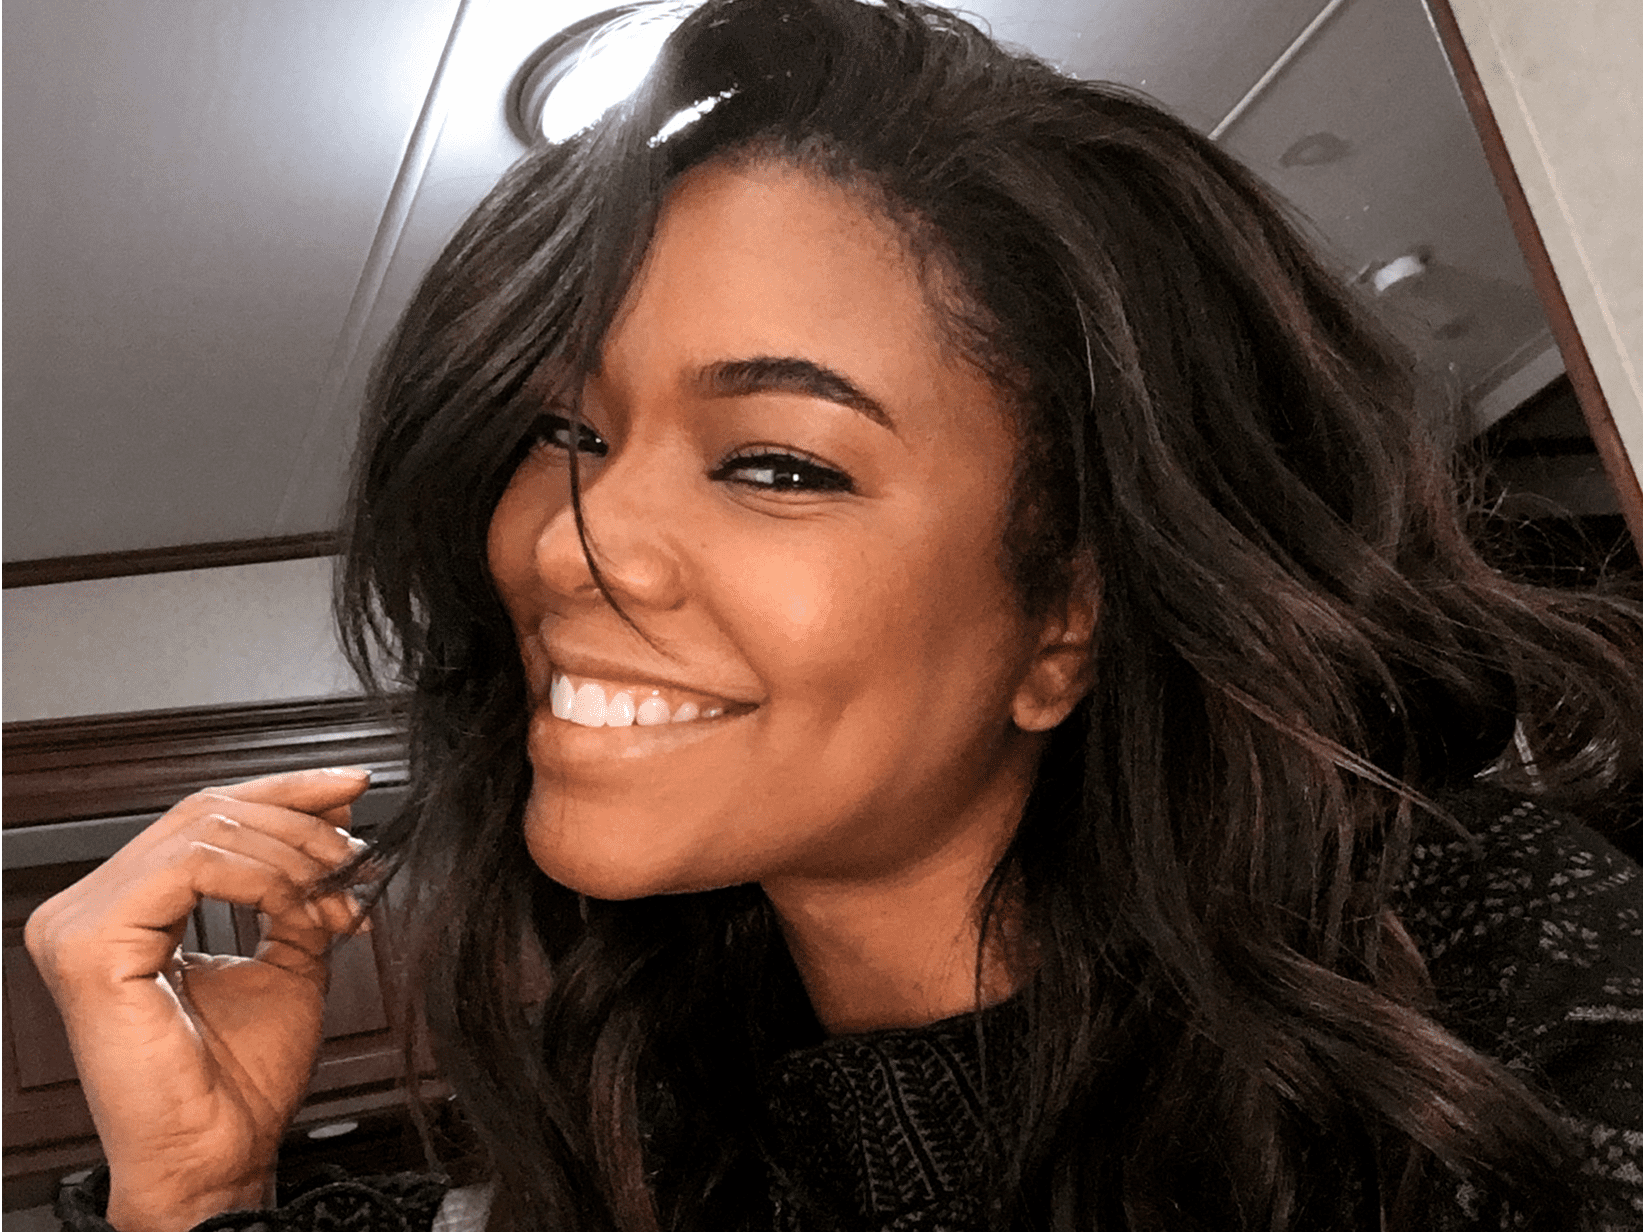 gabrielle-union-praises-amber-ruffin-and-her-show